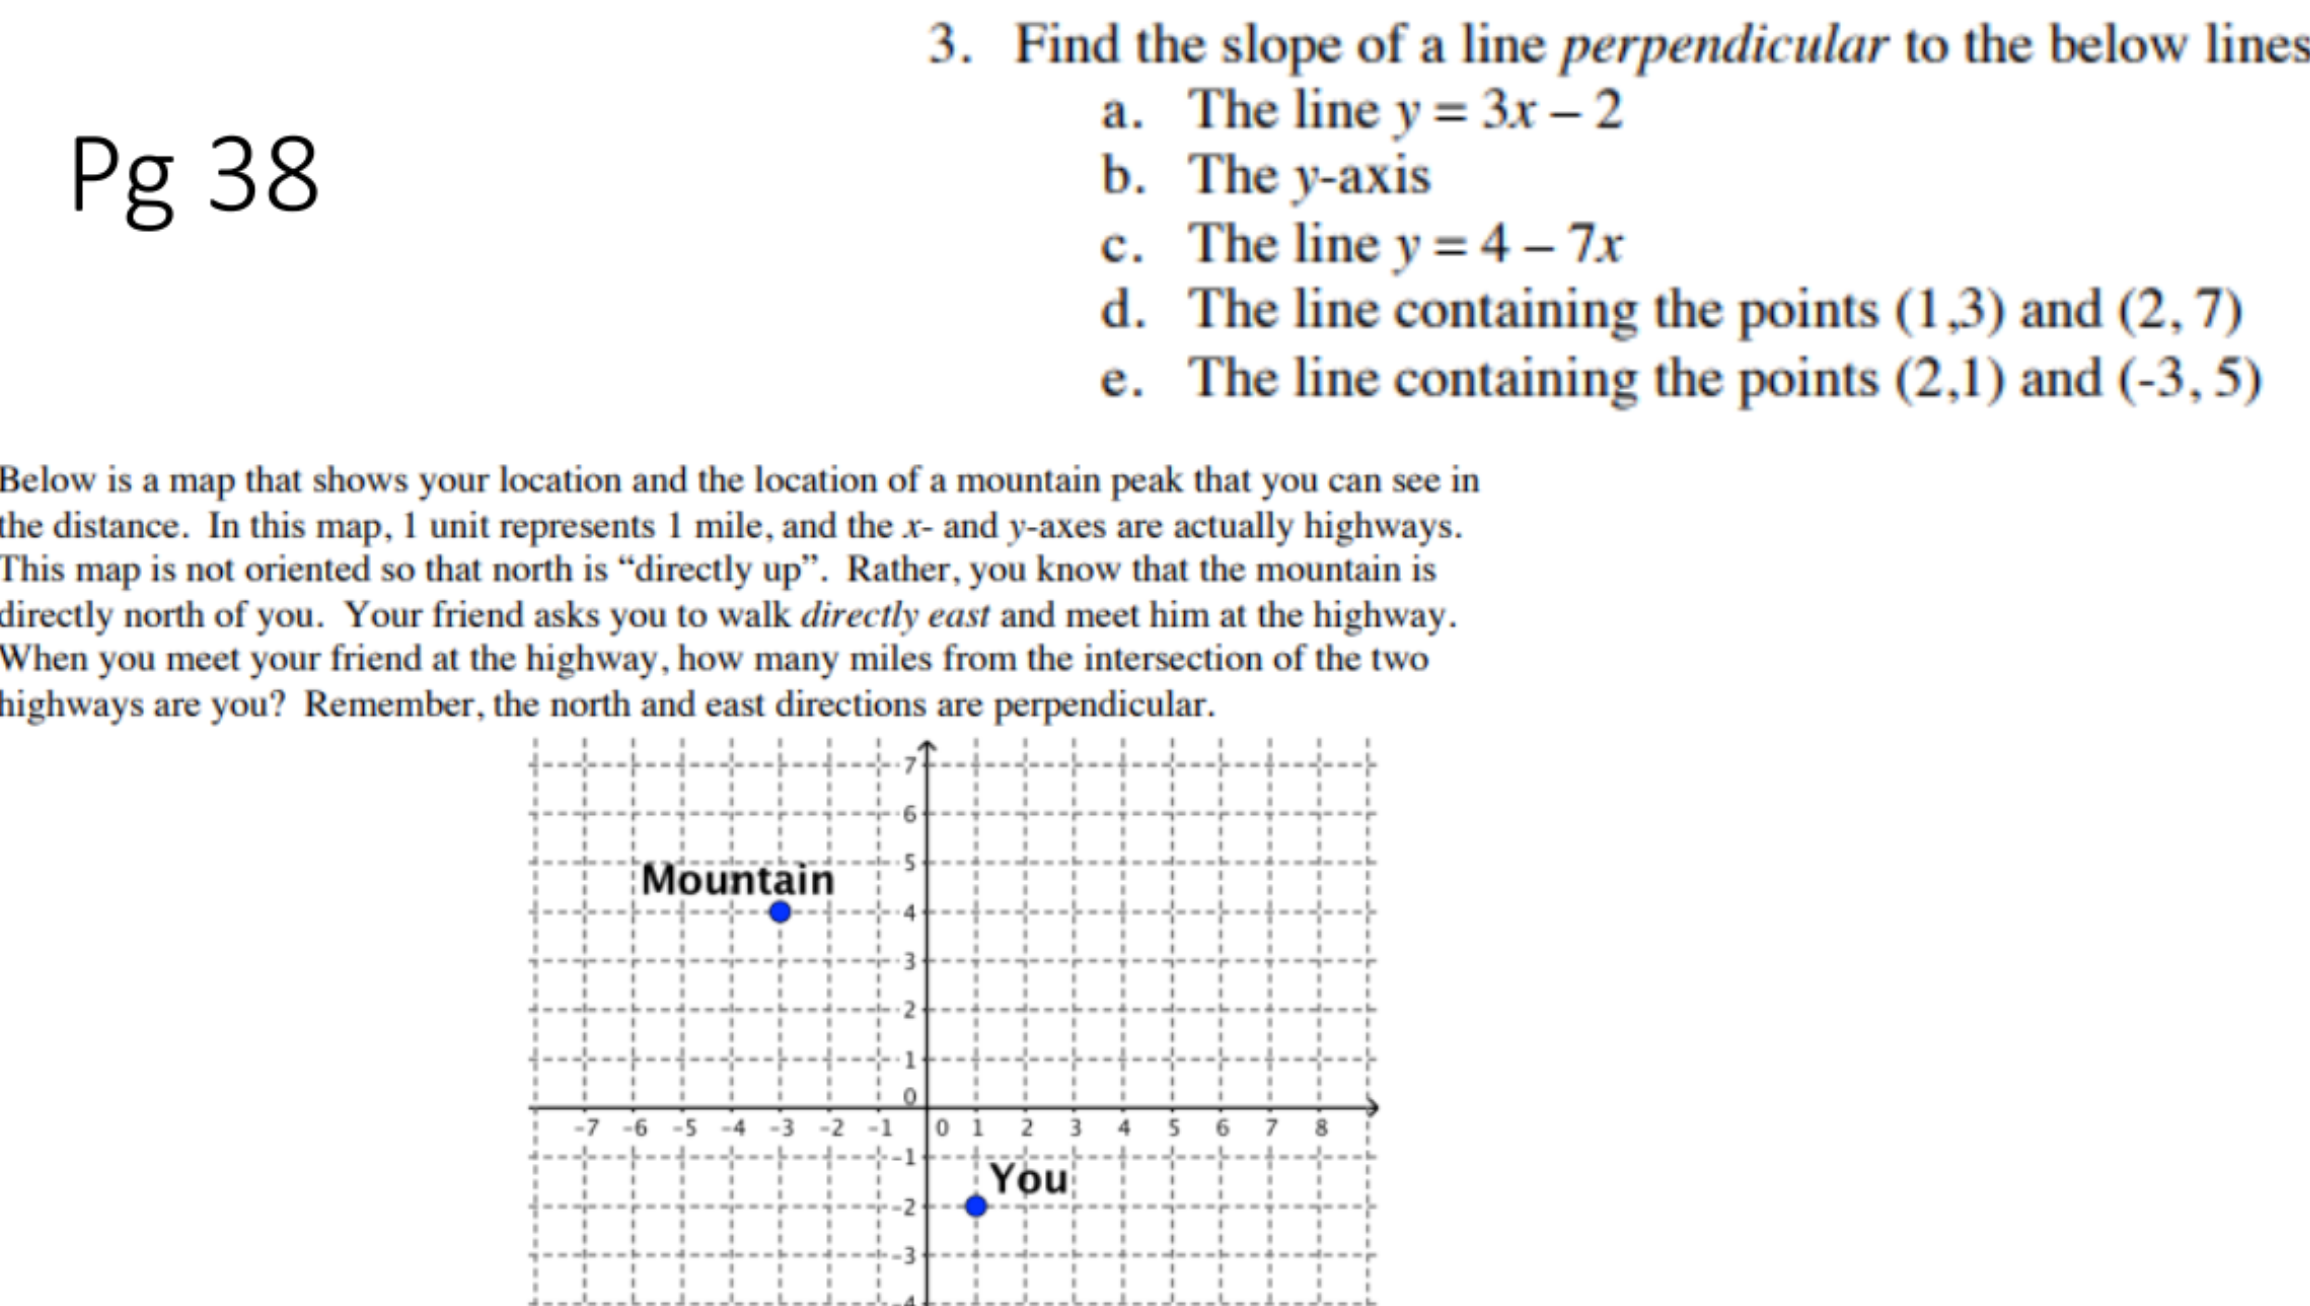 Find the slope of a line perpendicular to the below lines
a. The line y = 3x – 2
b. The y-axis
c. The line y = 4 – 7x
